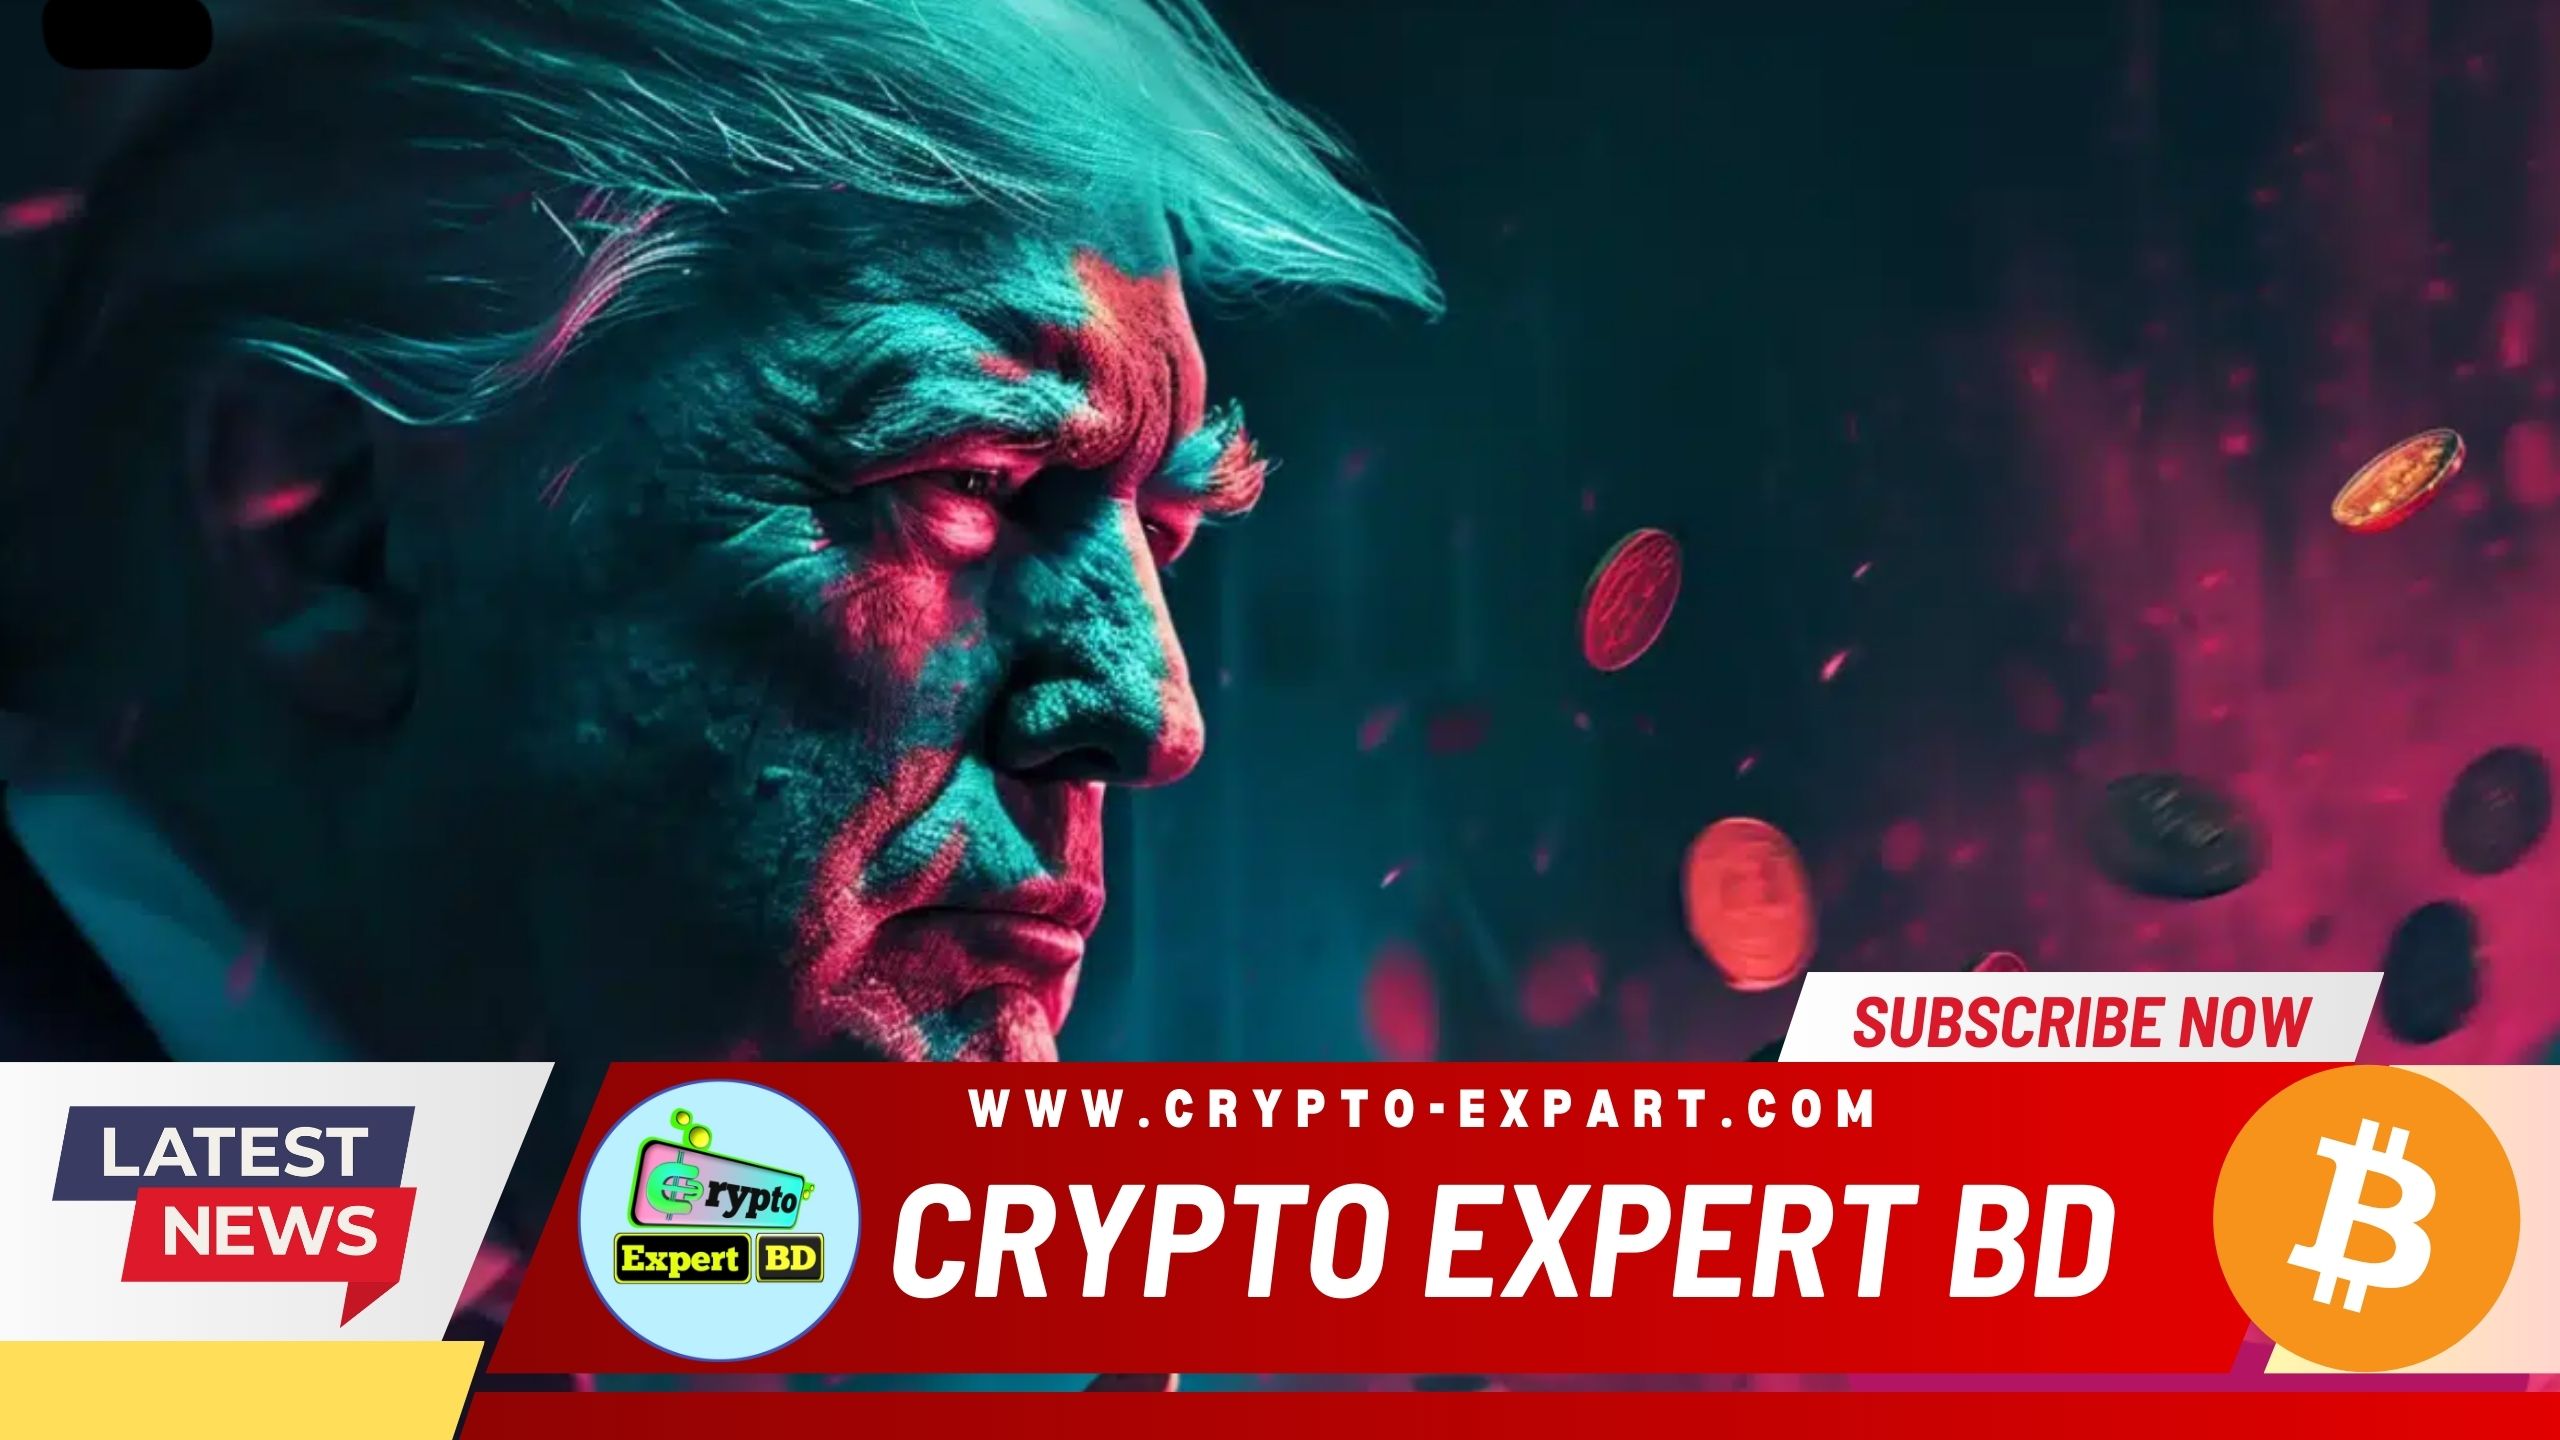 Trump Dubs Himself ‘Crypto President’: Can It Win Over Voters Post-Conviction?